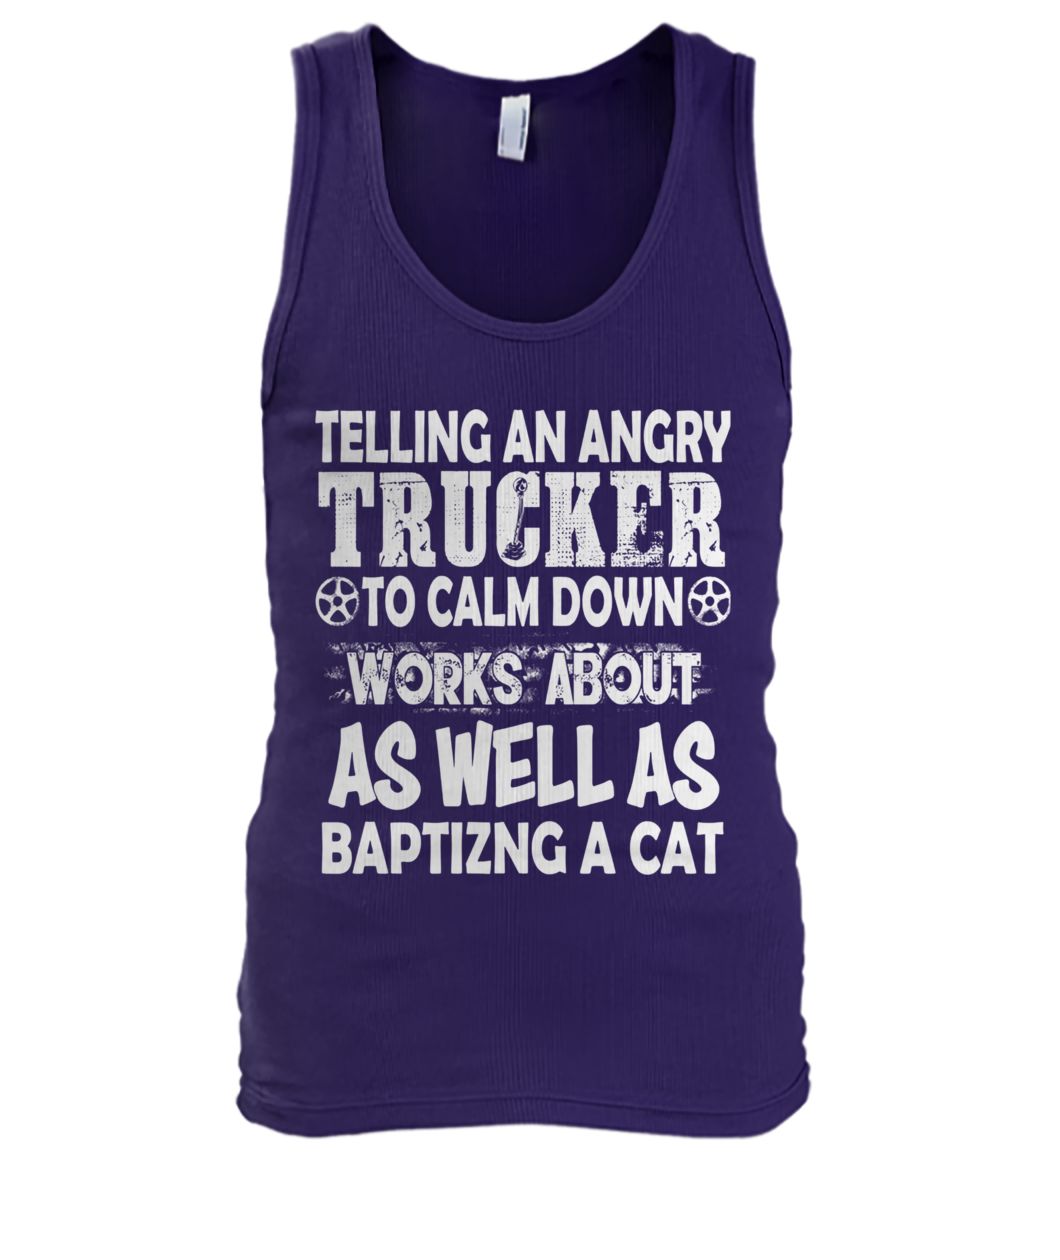 Telling an angry trucker to calm down works about as well as baptizng a cat men's tank top